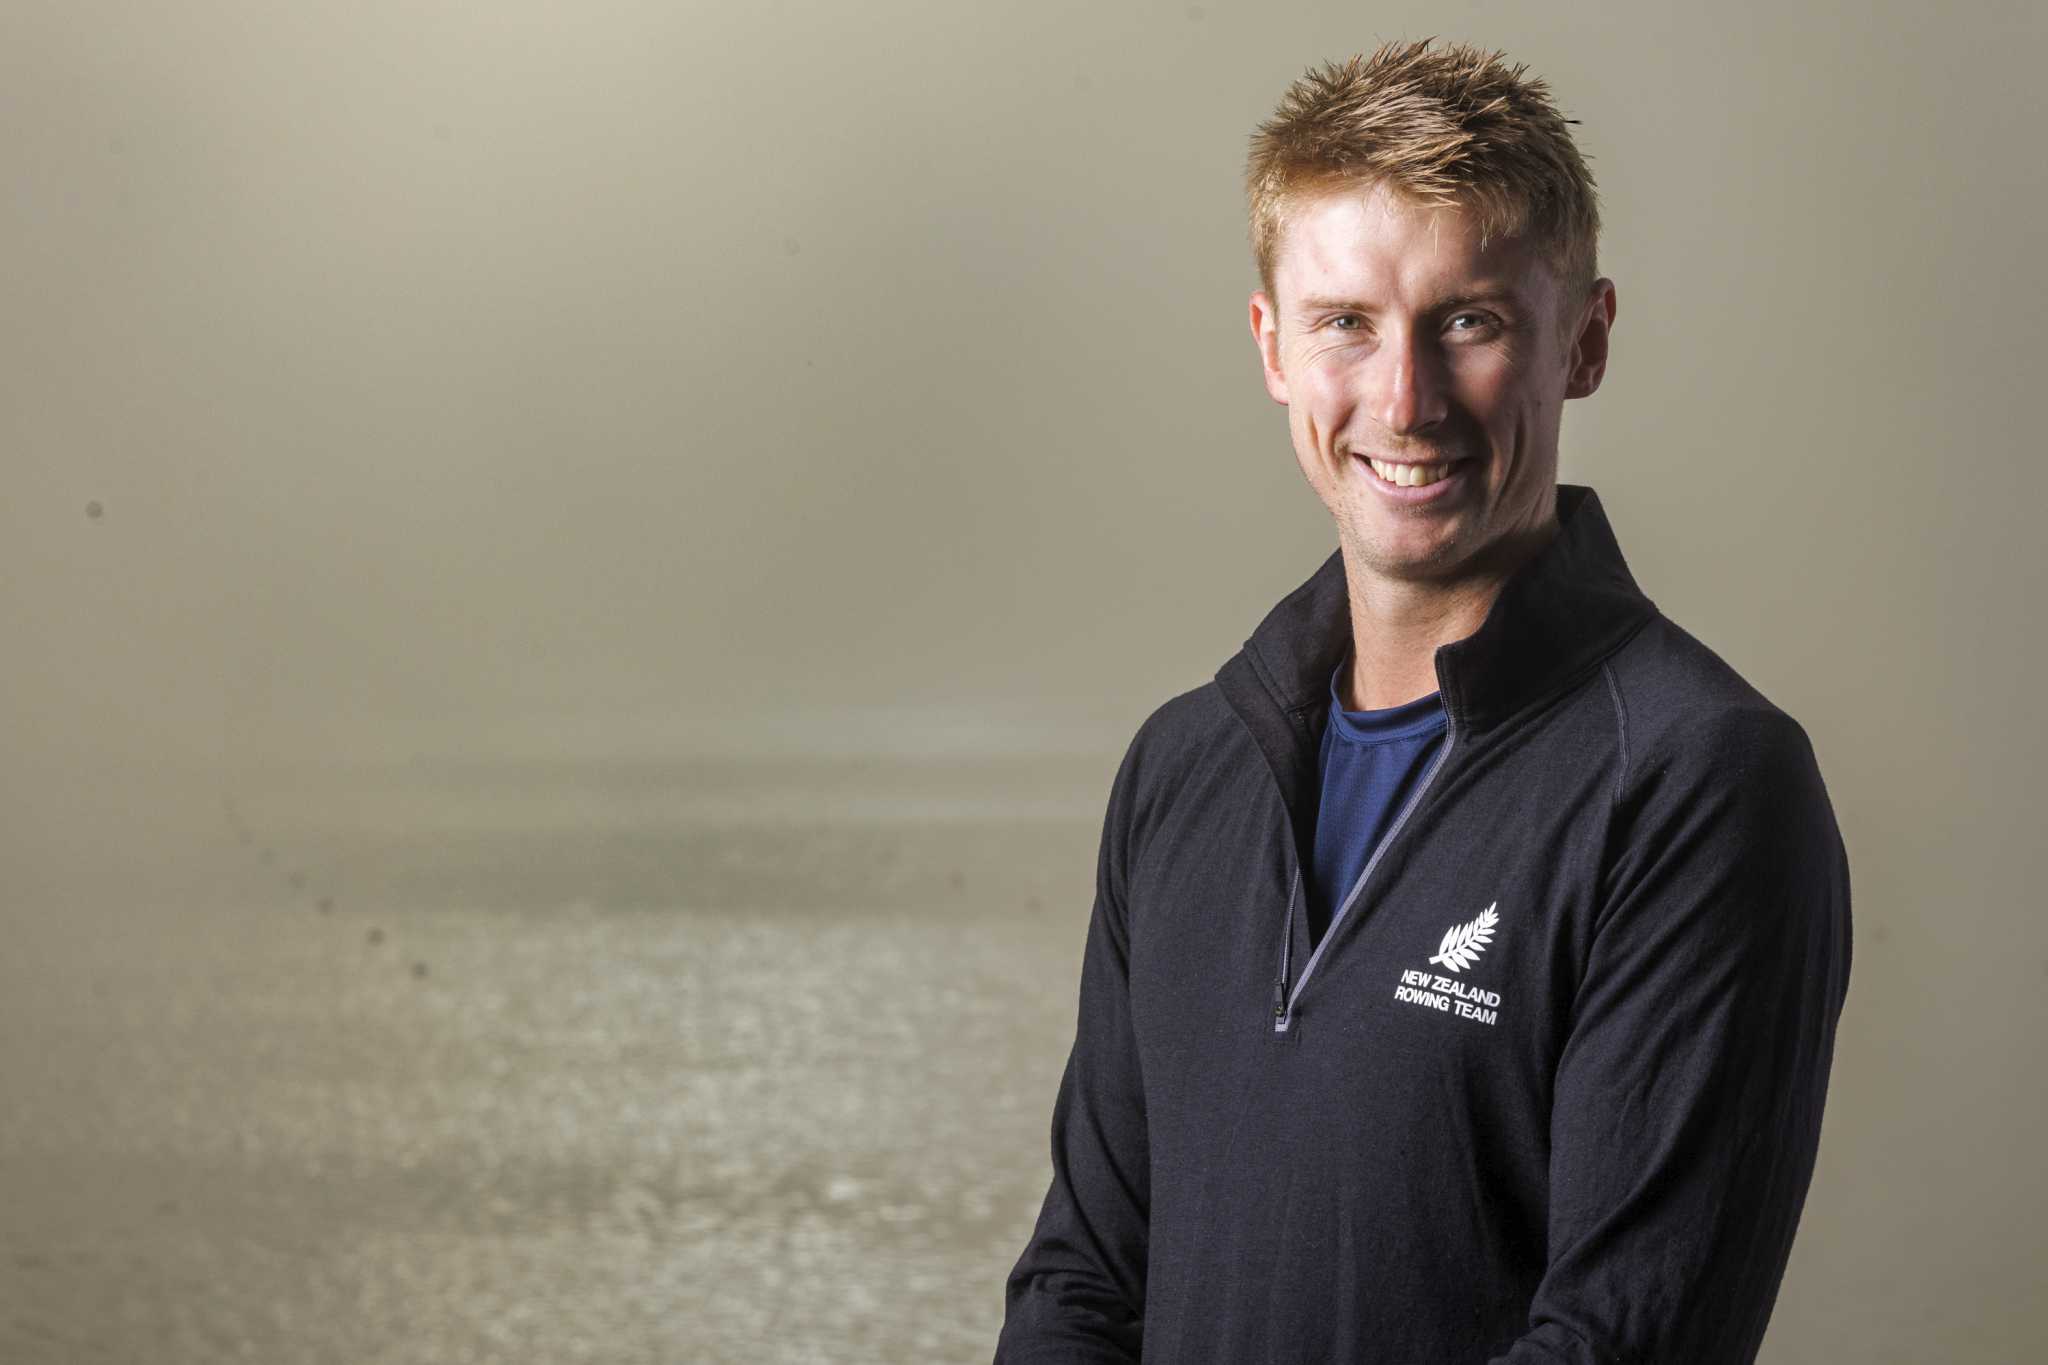 Kiwi rower Mackintosh swaps seats, gives up corporate life to pursue another Olympic medal in Paris